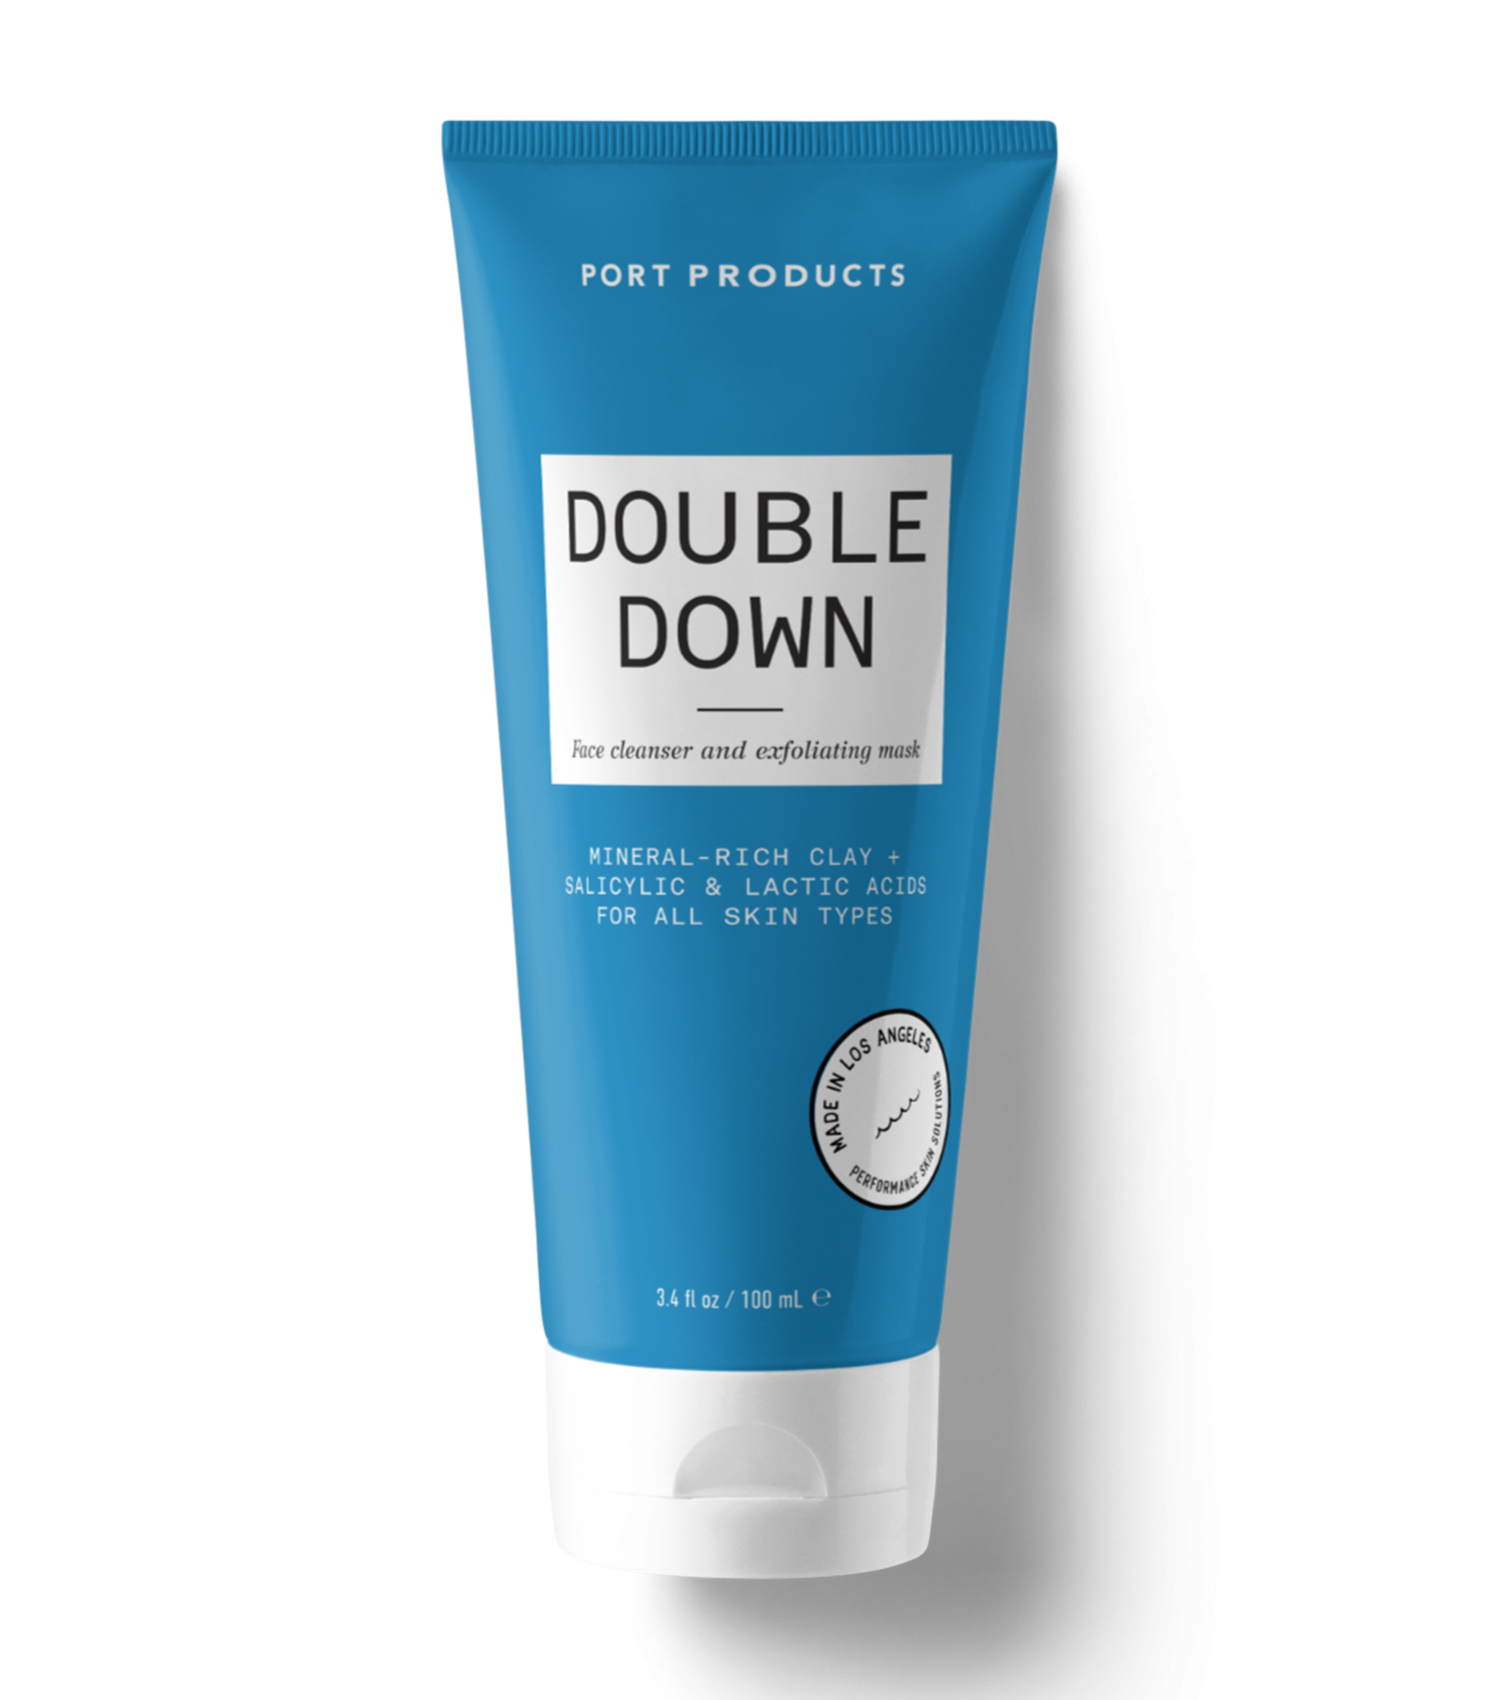 Port Products Double Down Facial Cleanser and Exfoliating Mask